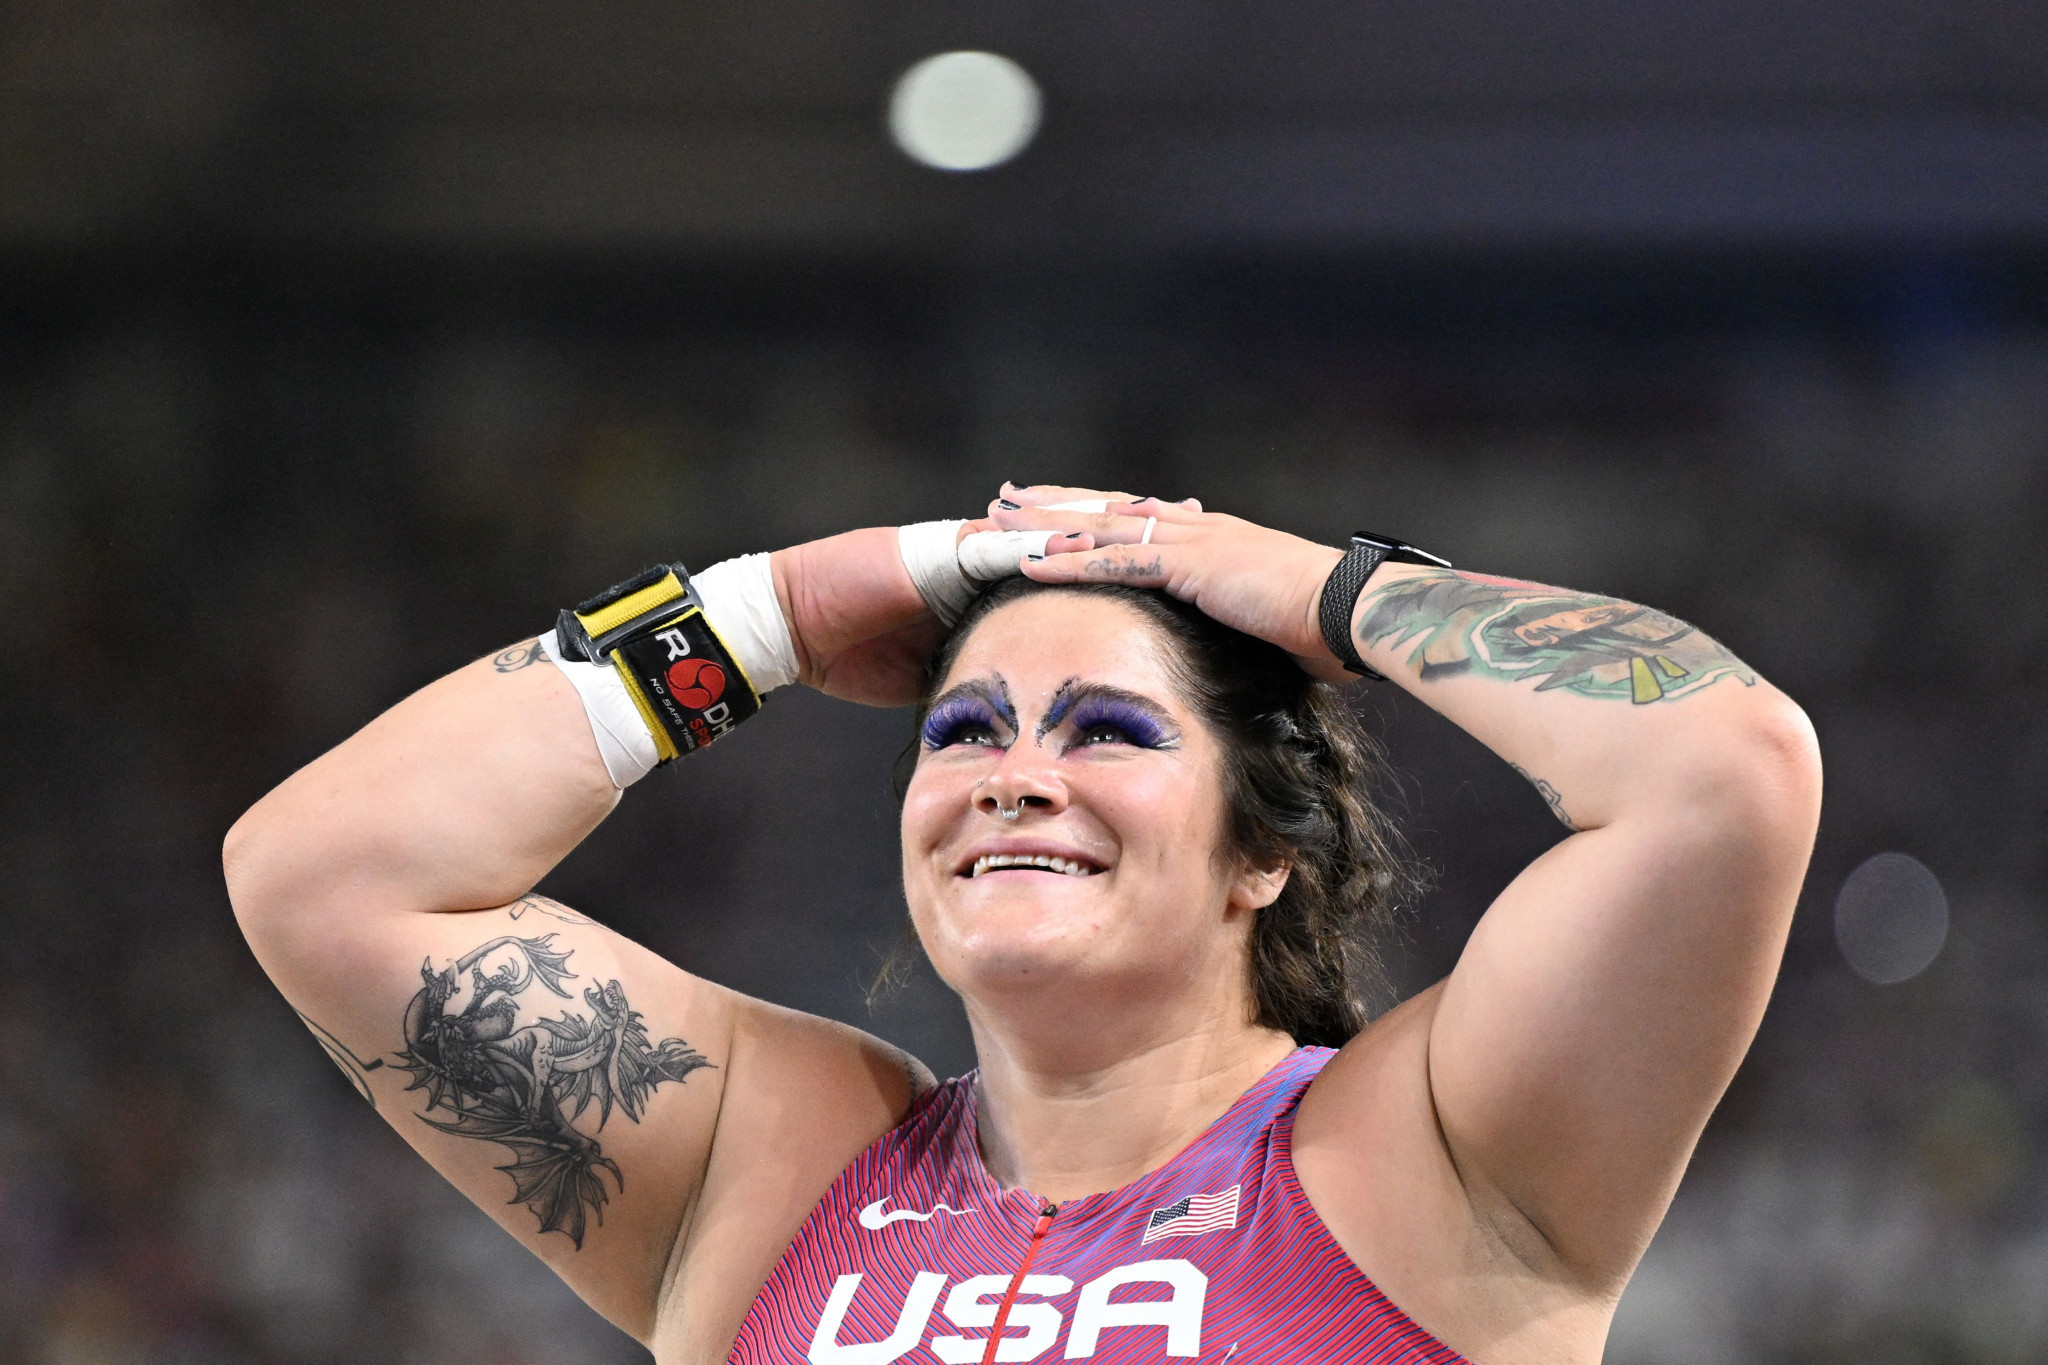 Chase Ealey made it back-to-back women's shot put golds to contribute to three victories for the US on the penultimate day of the World Championships ©Getty Images